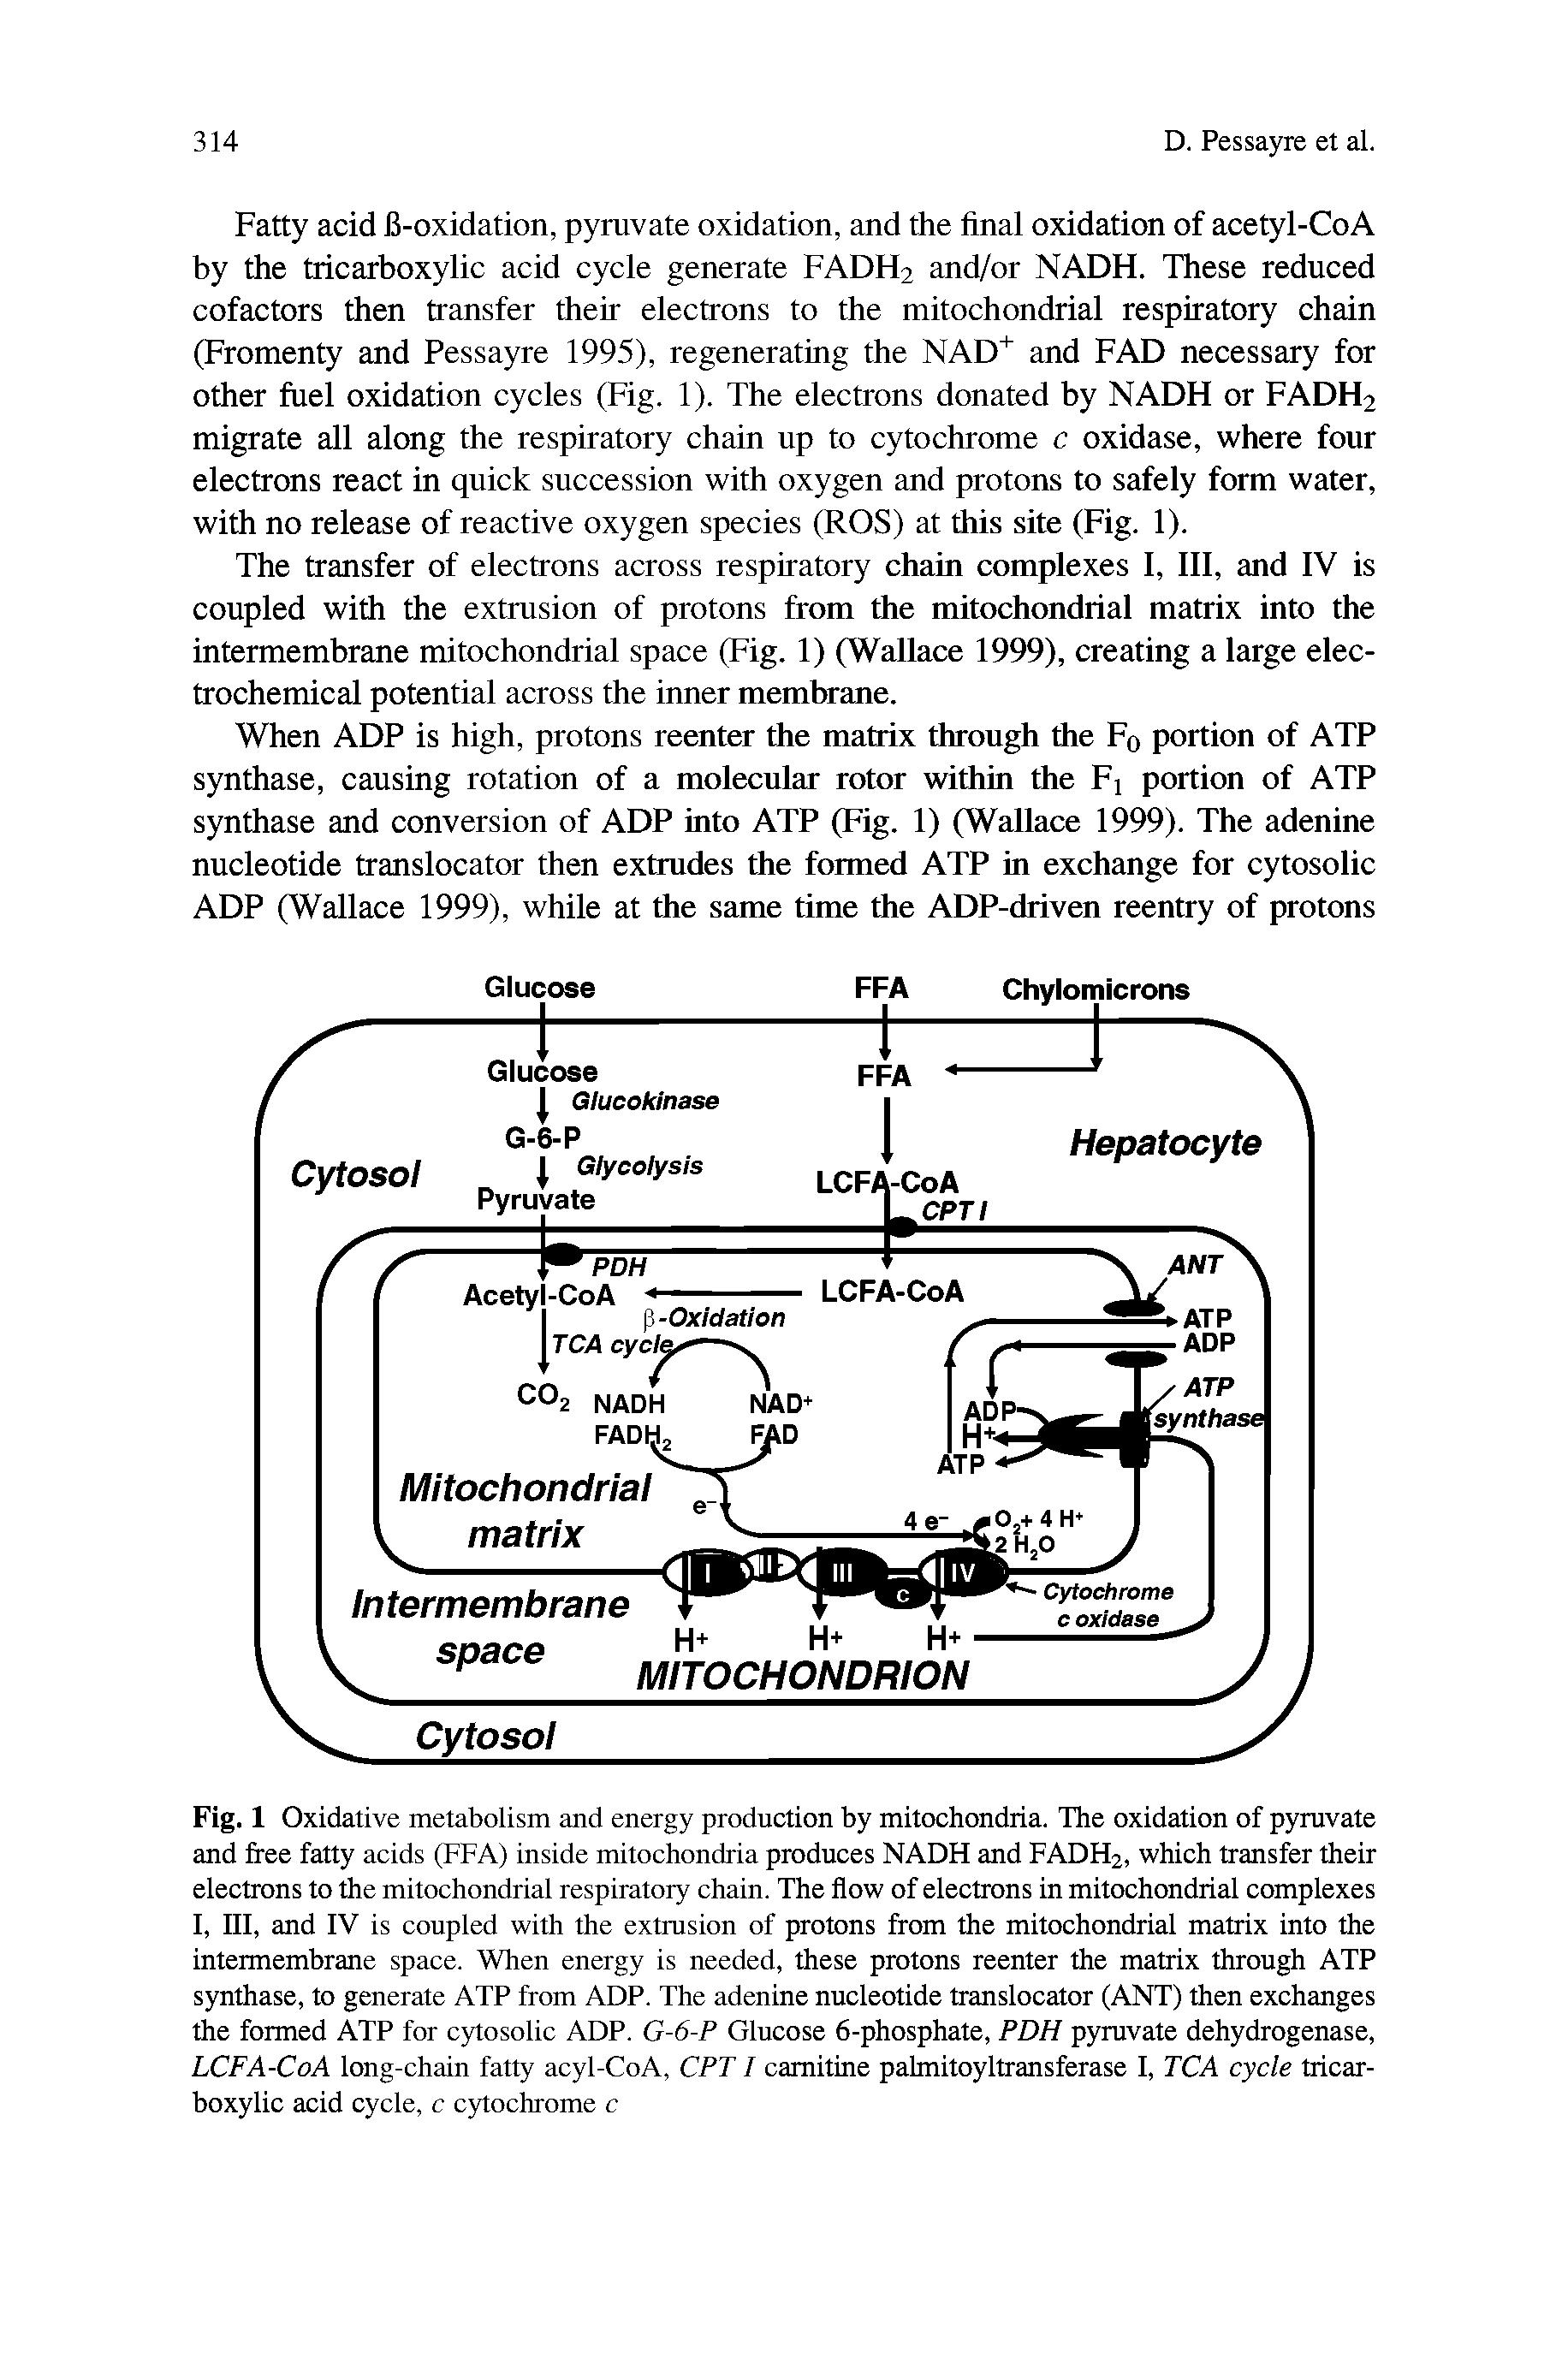 Fig. 1 Oxidative metabolism and energy production by mitochondria. The oxidation of pyruvate and free fatty acids (FFA) inside mitochondria produces NADH and FADH2, which transfer their electrons to the mitochondrial respiratory chain. The flow of electrons in mitochondrial complexes I, III, and IV is coupled with the extrusion of protons from the mitochondrial matrix into the intermembrane space. When energy is needed, these protons reenter the matrix through ATP synthase, to generate ATP from ADP. The adenine nucleotide translocator (ANT) then exchanges the formed ATP for cytosolic ADP. G-6-P Glucose 6-phosphate, PDH pyruvate dehydrogenase, LCFA-CoA long-chain fatty acyl-CoA, CPTI carnitine palmitoyltransferase I, TCA cycle tricarboxylic acid cycle, c cytochrome c...